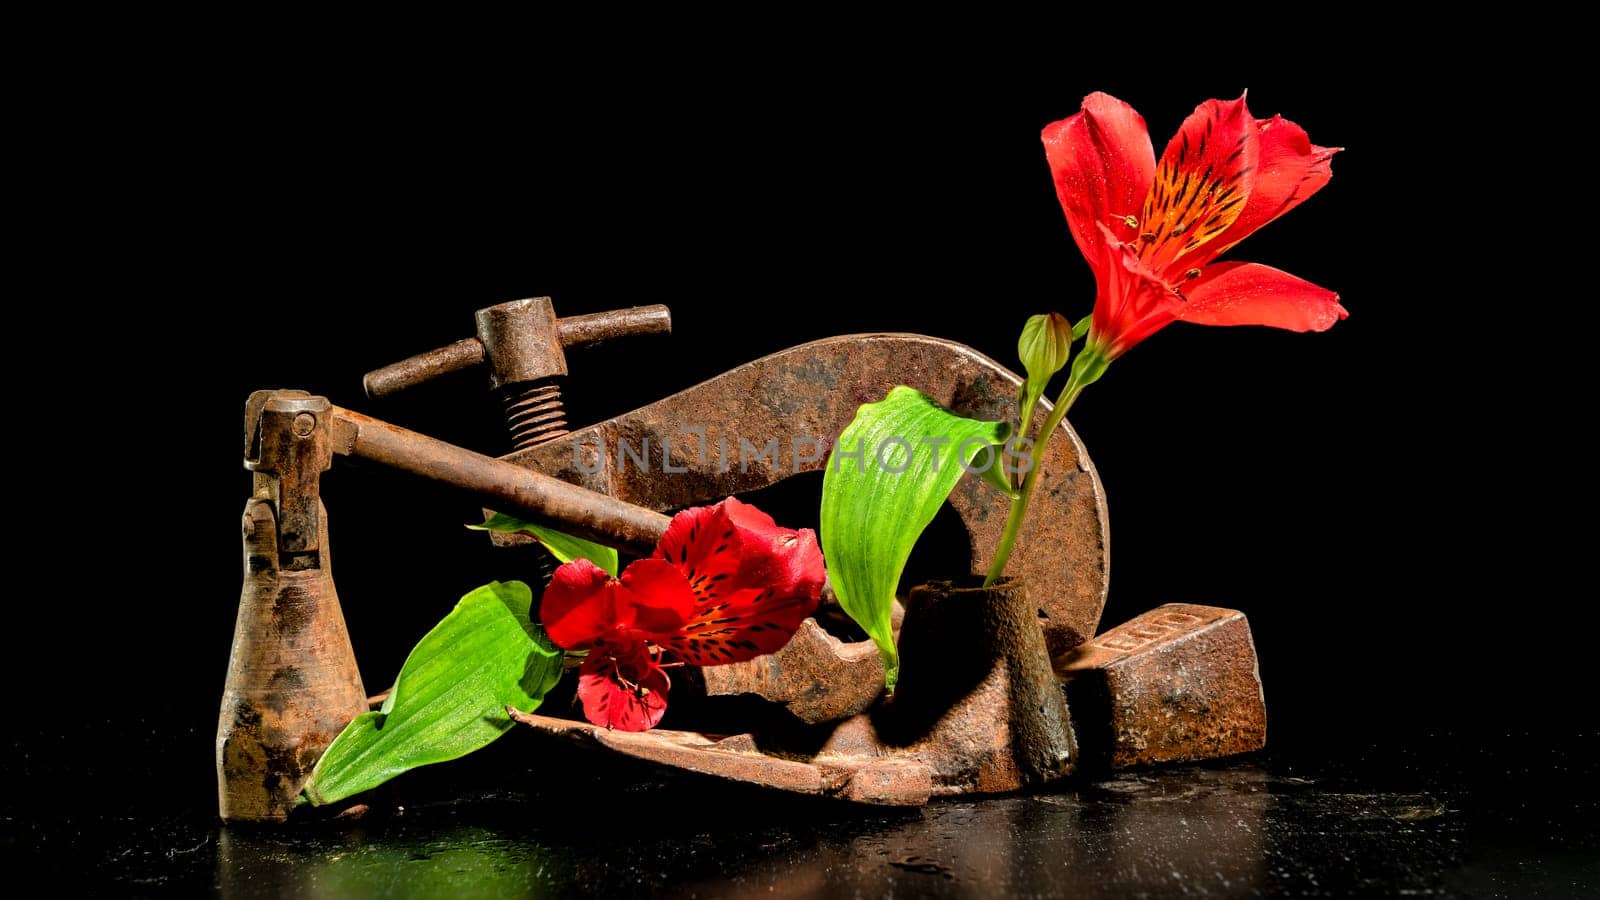 Old rusty metal tool and red flower on a black background by Multipedia